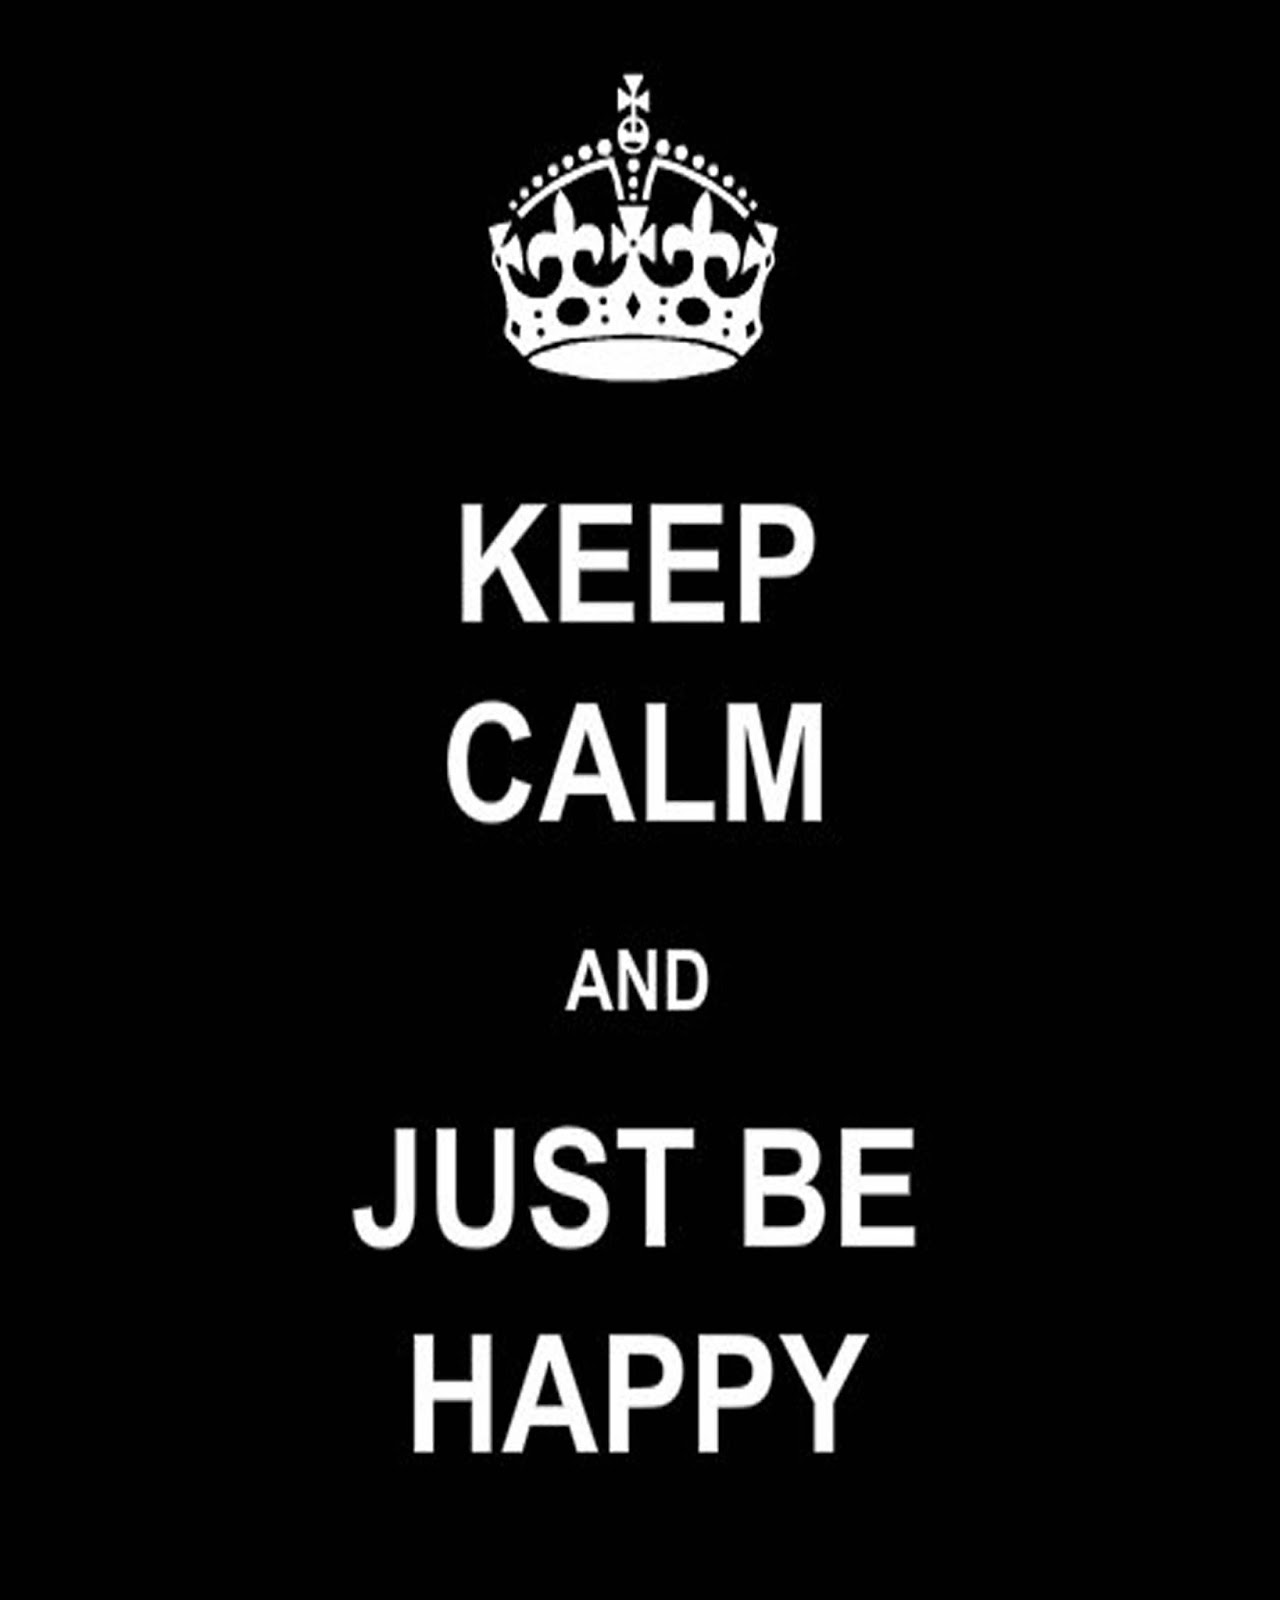 CJO Photo: Printable Word Art 8x10: Keep Calm and Just Be Happy